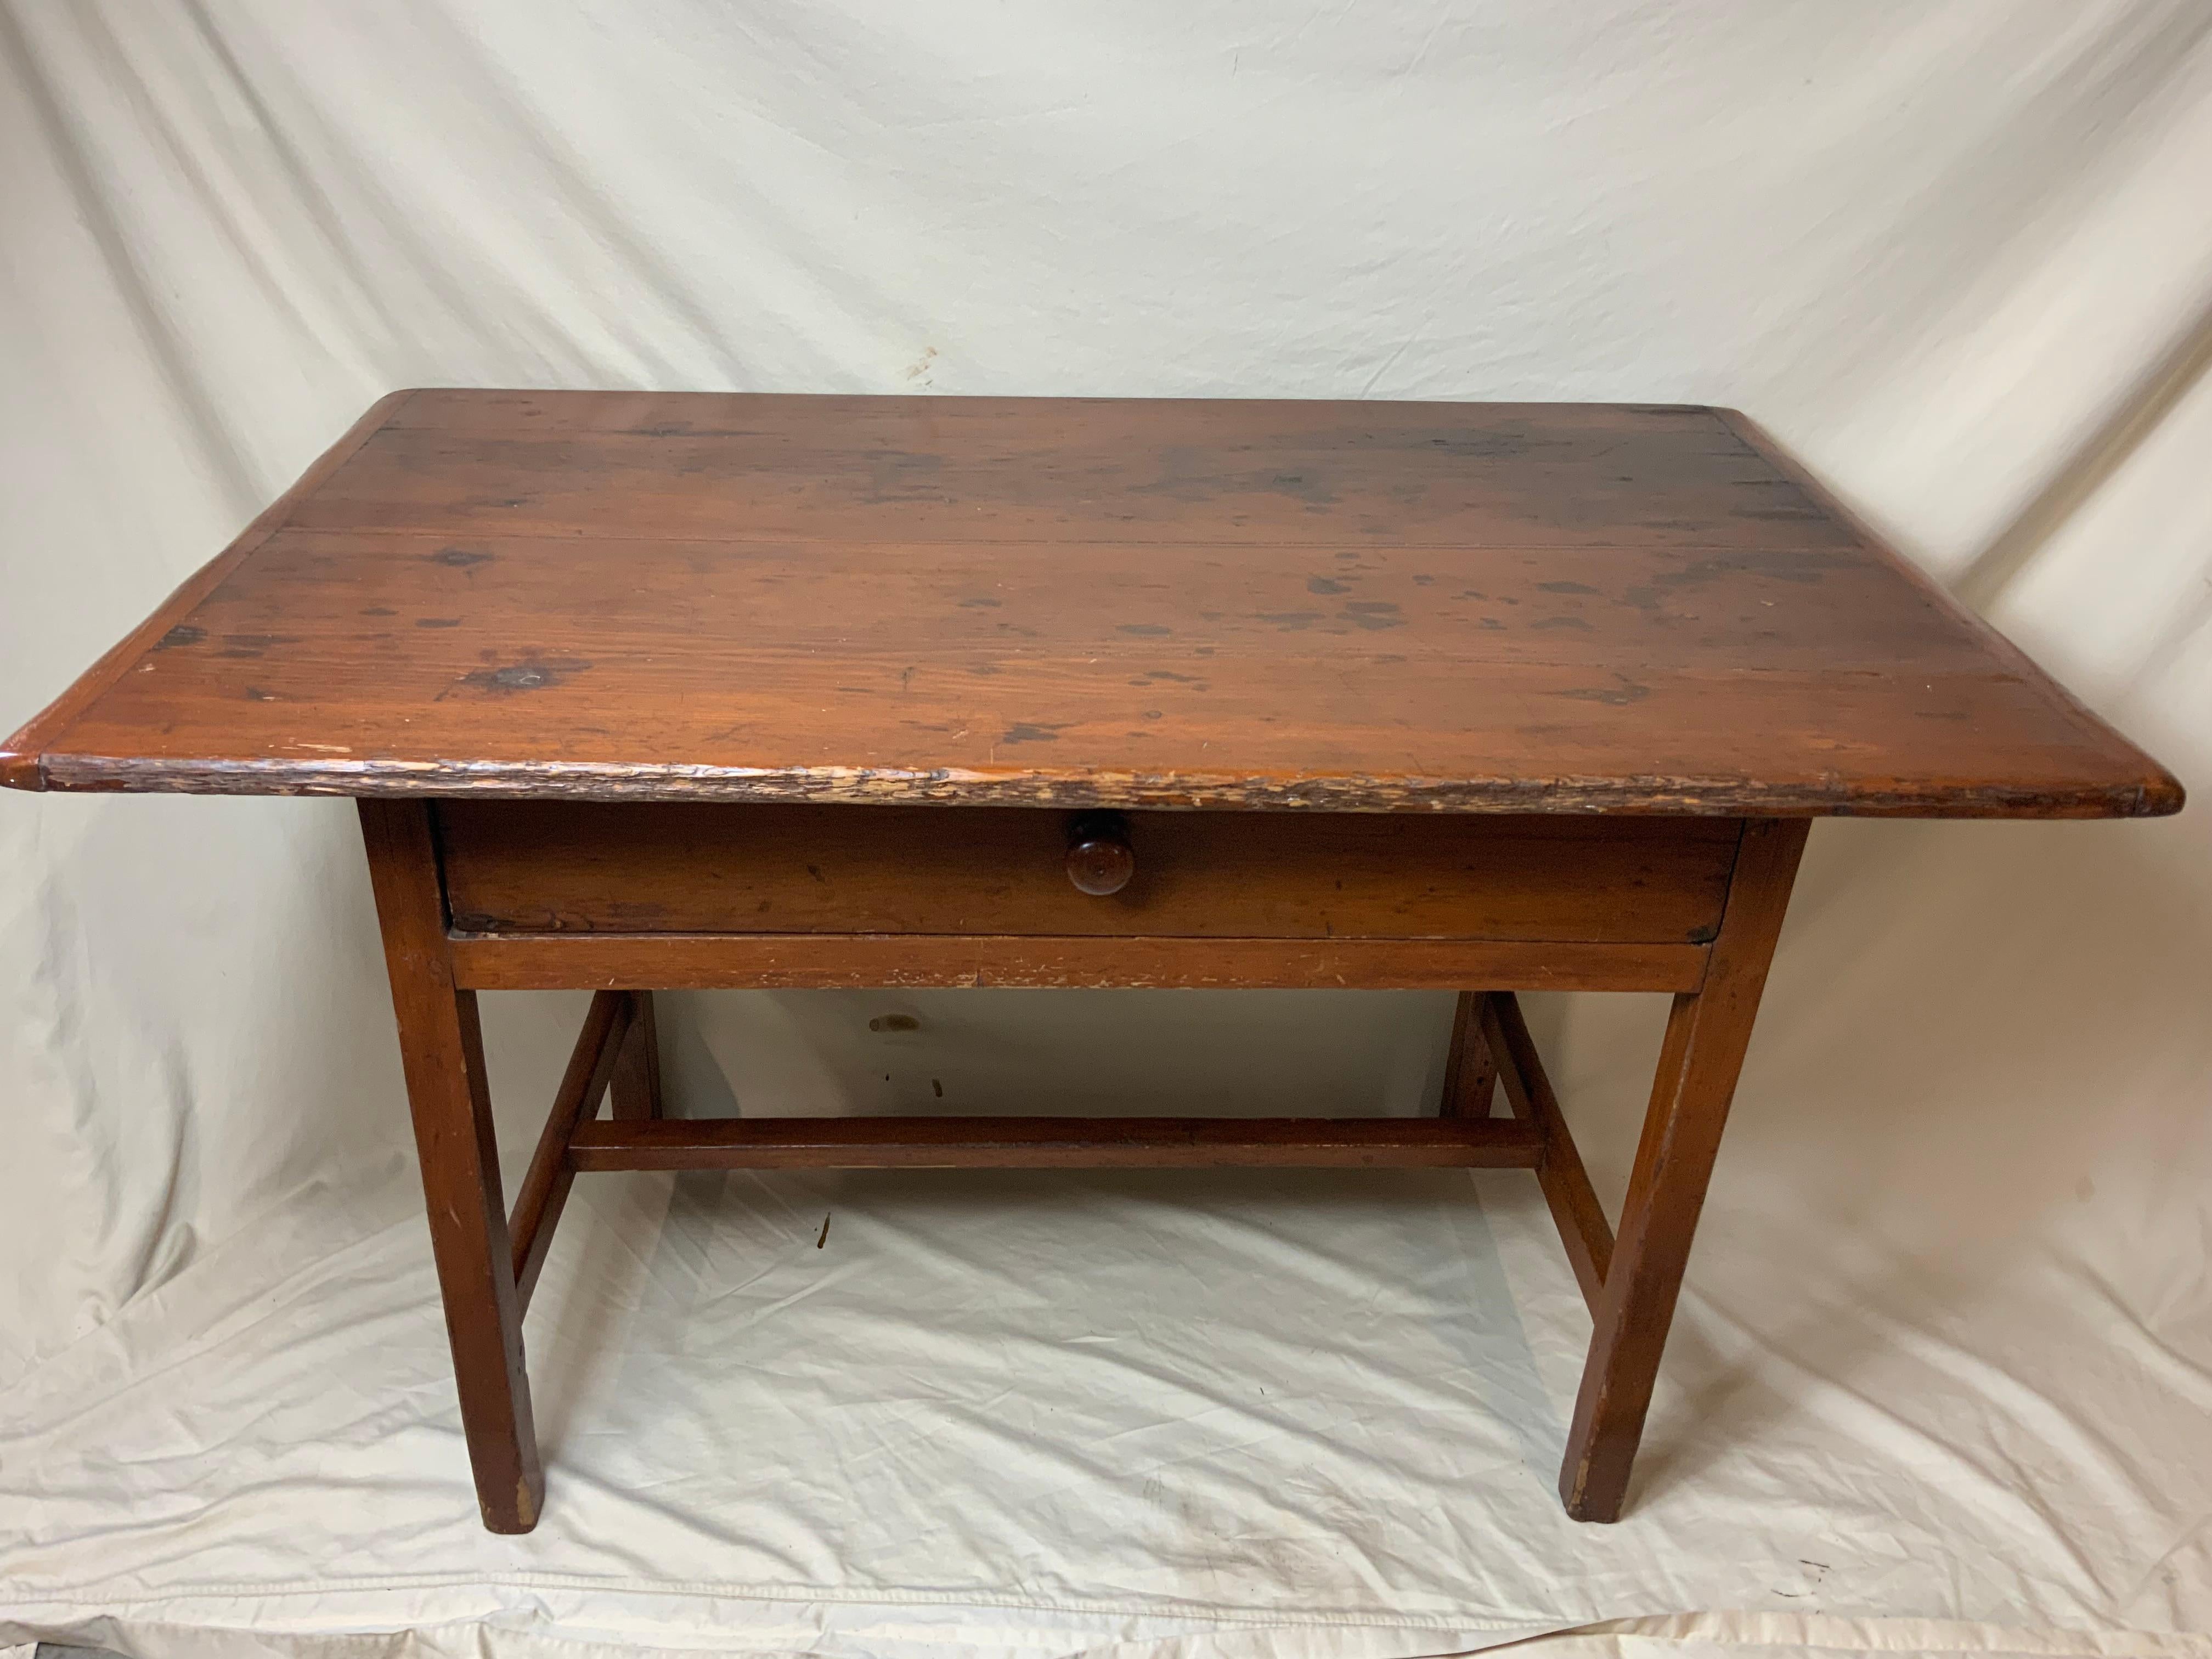 A nice early Pine New England Tavern Table 1780-90.  All pegged construction on an H stretcher base showing old Salmon color and Black paint. Old refinish with a great color and patina.  Please ask for additional shipping quotes.